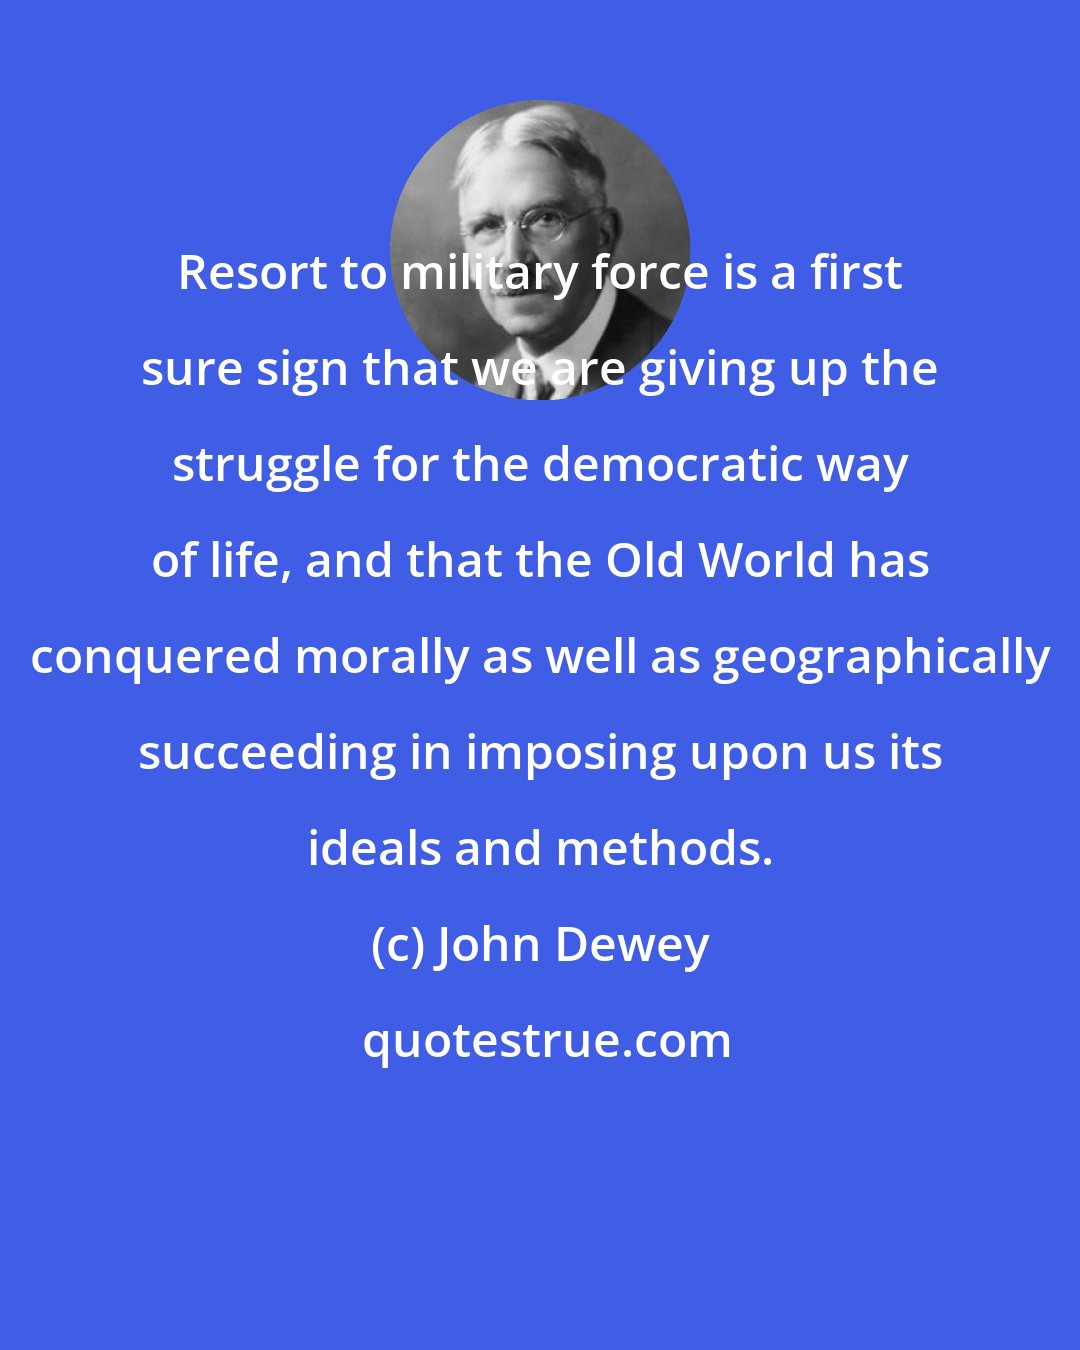 John Dewey: Resort to military force is a first sure sign that we are giving up the struggle for the democratic way of life, and that the Old World has conquered morally as well as geographically succeeding in imposing upon us its ideals and methods.